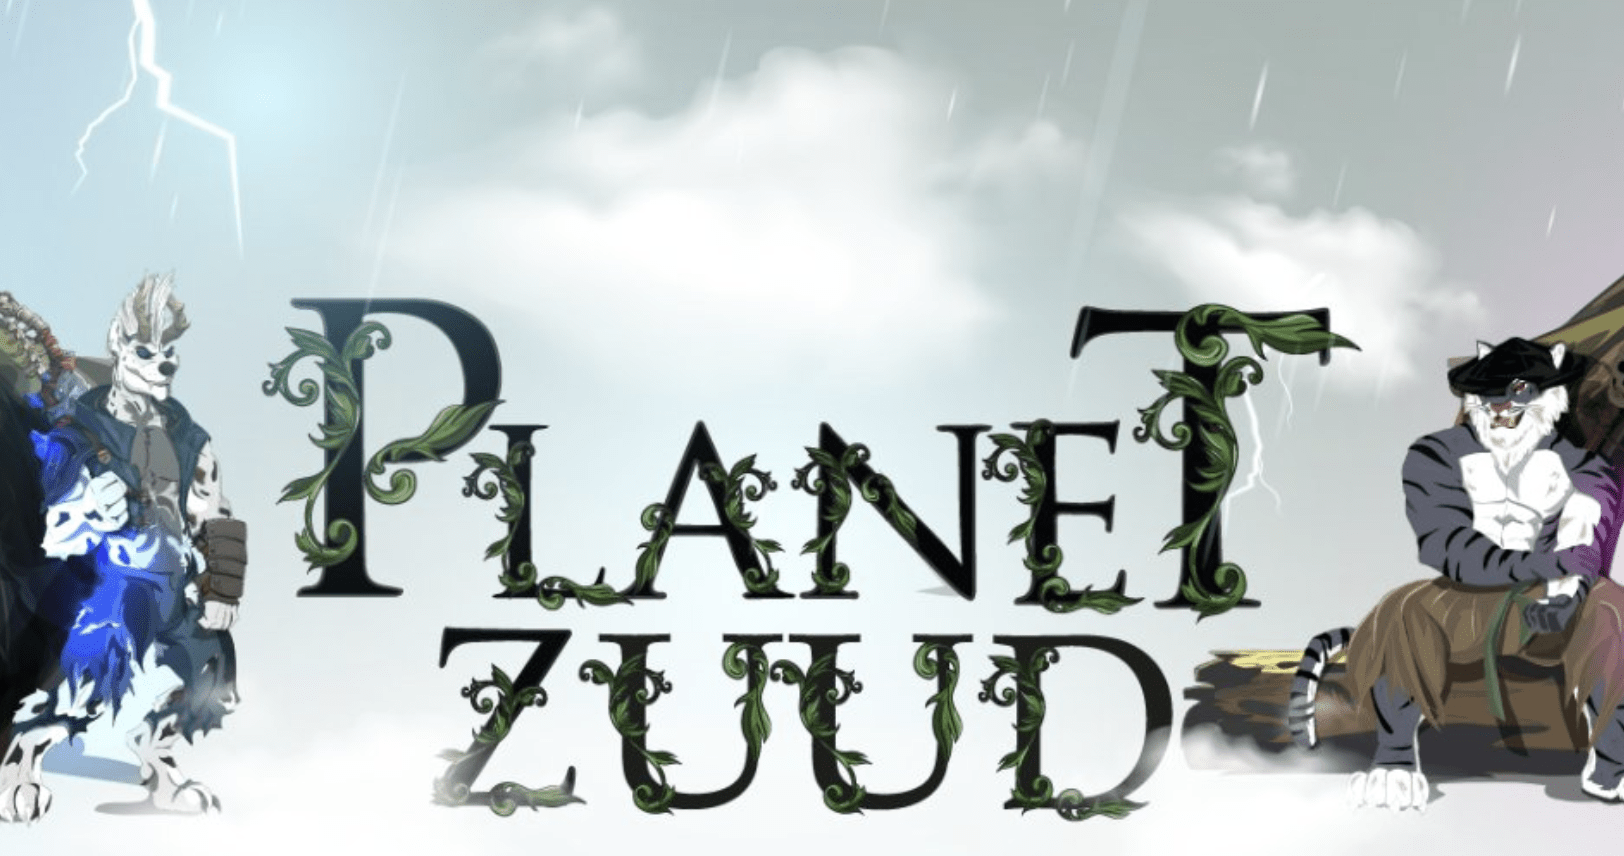 Planet ZUUD cover